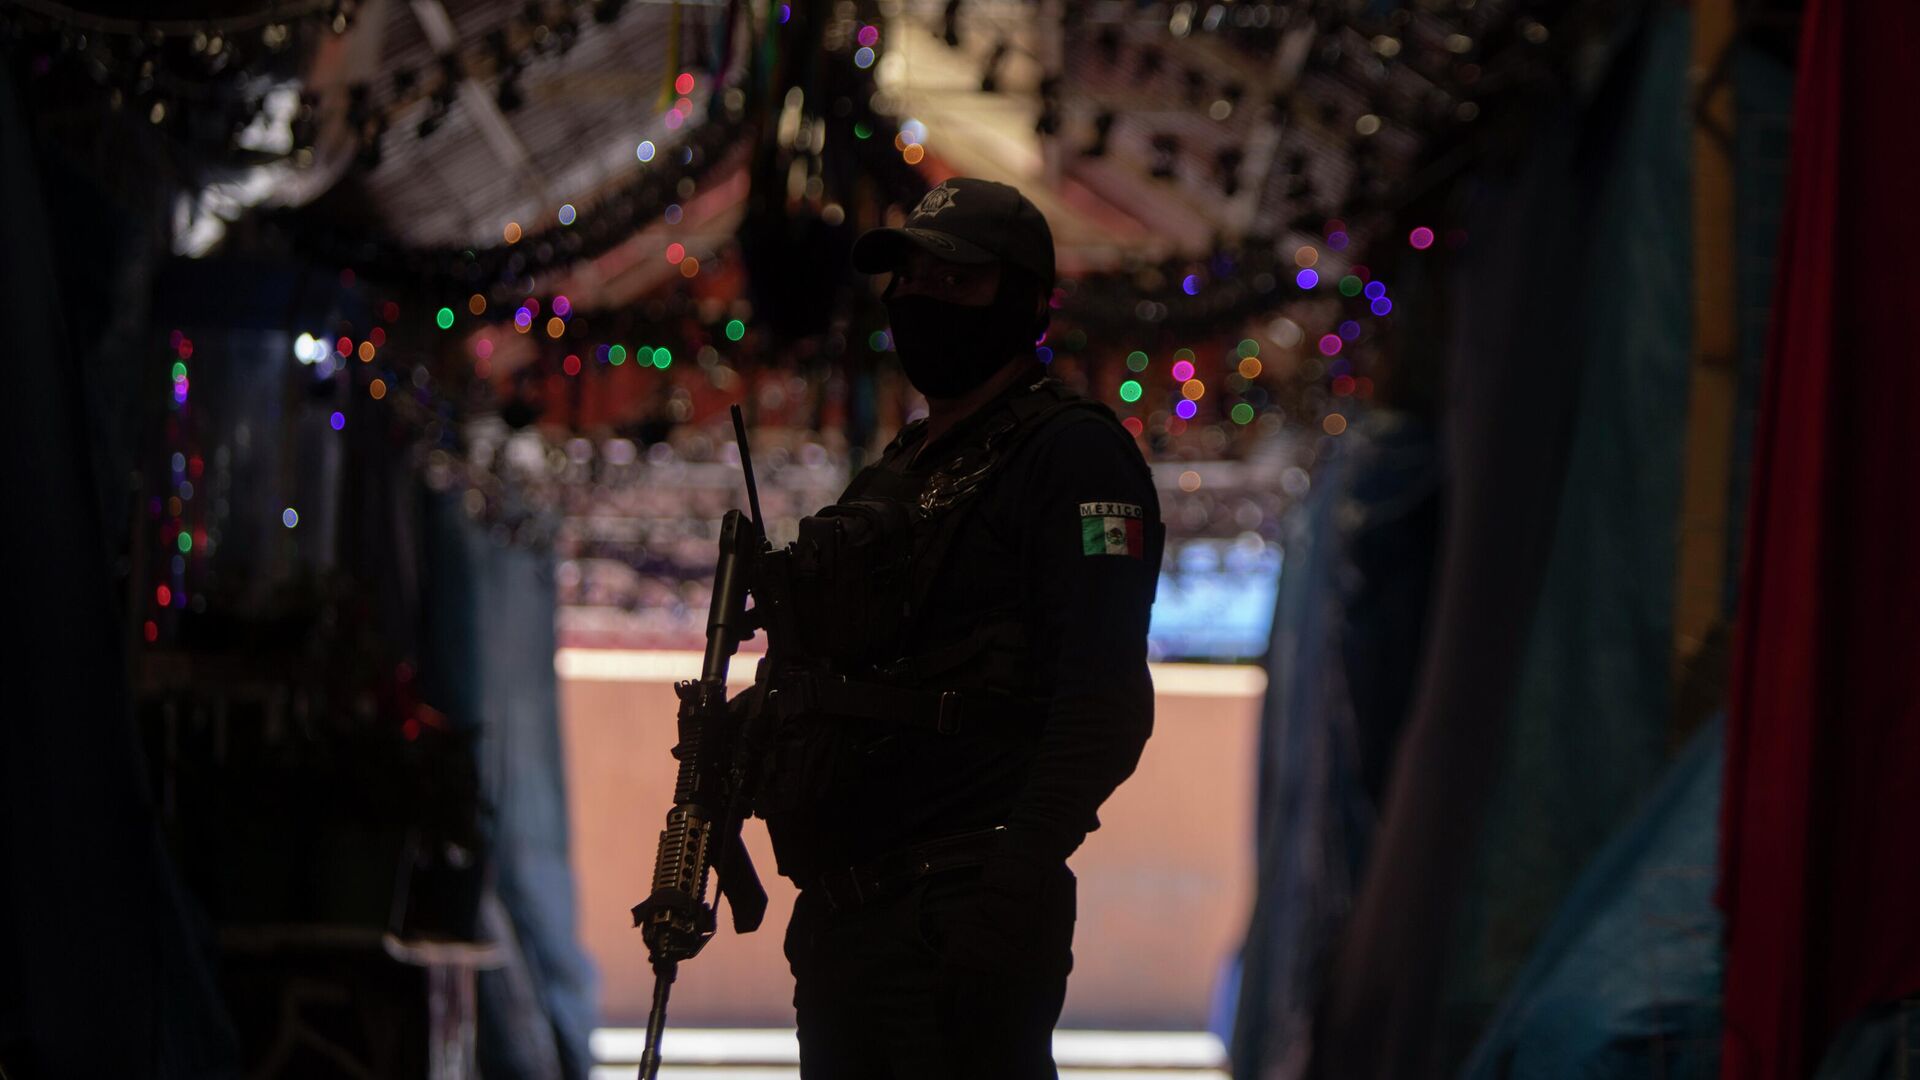 A police officer stand near the area of a massive shootout in Parangaricutiro, Mexico,Thursday, March 10, 2022. Authorities in the avocado-growing zone of western Mexico said five suspected drug cartel gunmen have been killed in a massive firefight between gangs. - Sputnik International, 1920, 19.04.2022